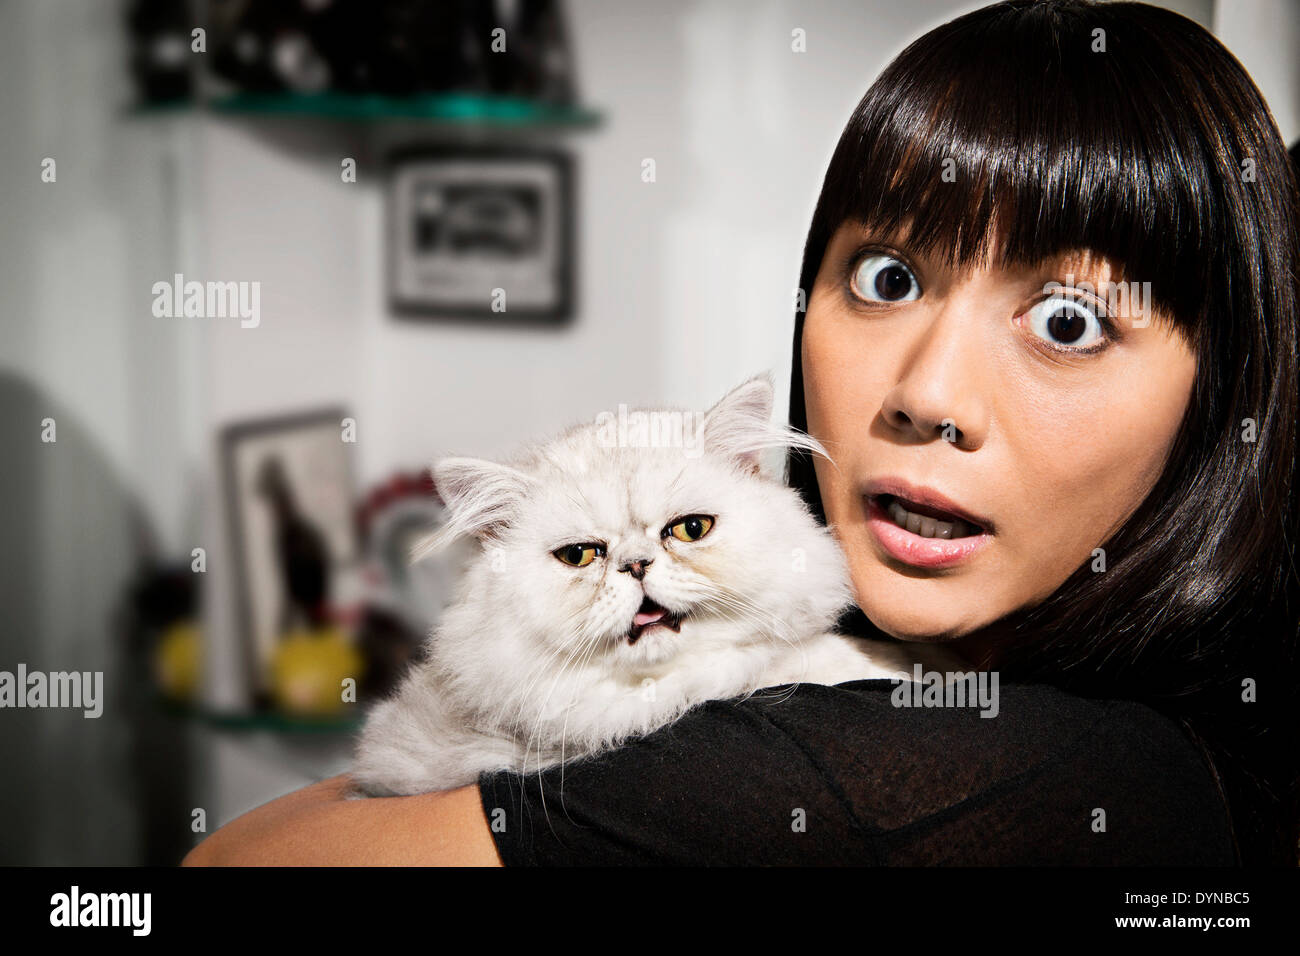 Surprised woman holding cat Stock Photo